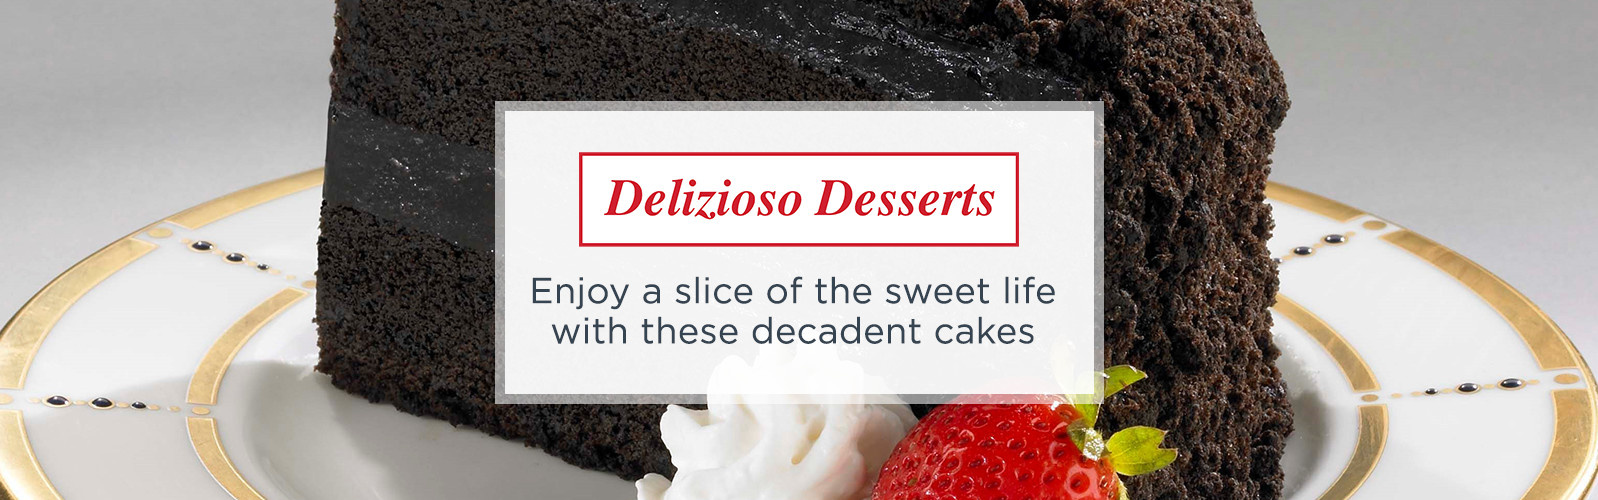 Delizioso Desserts  -- Enjoy a slice of the sweet life with these decadent cakes 